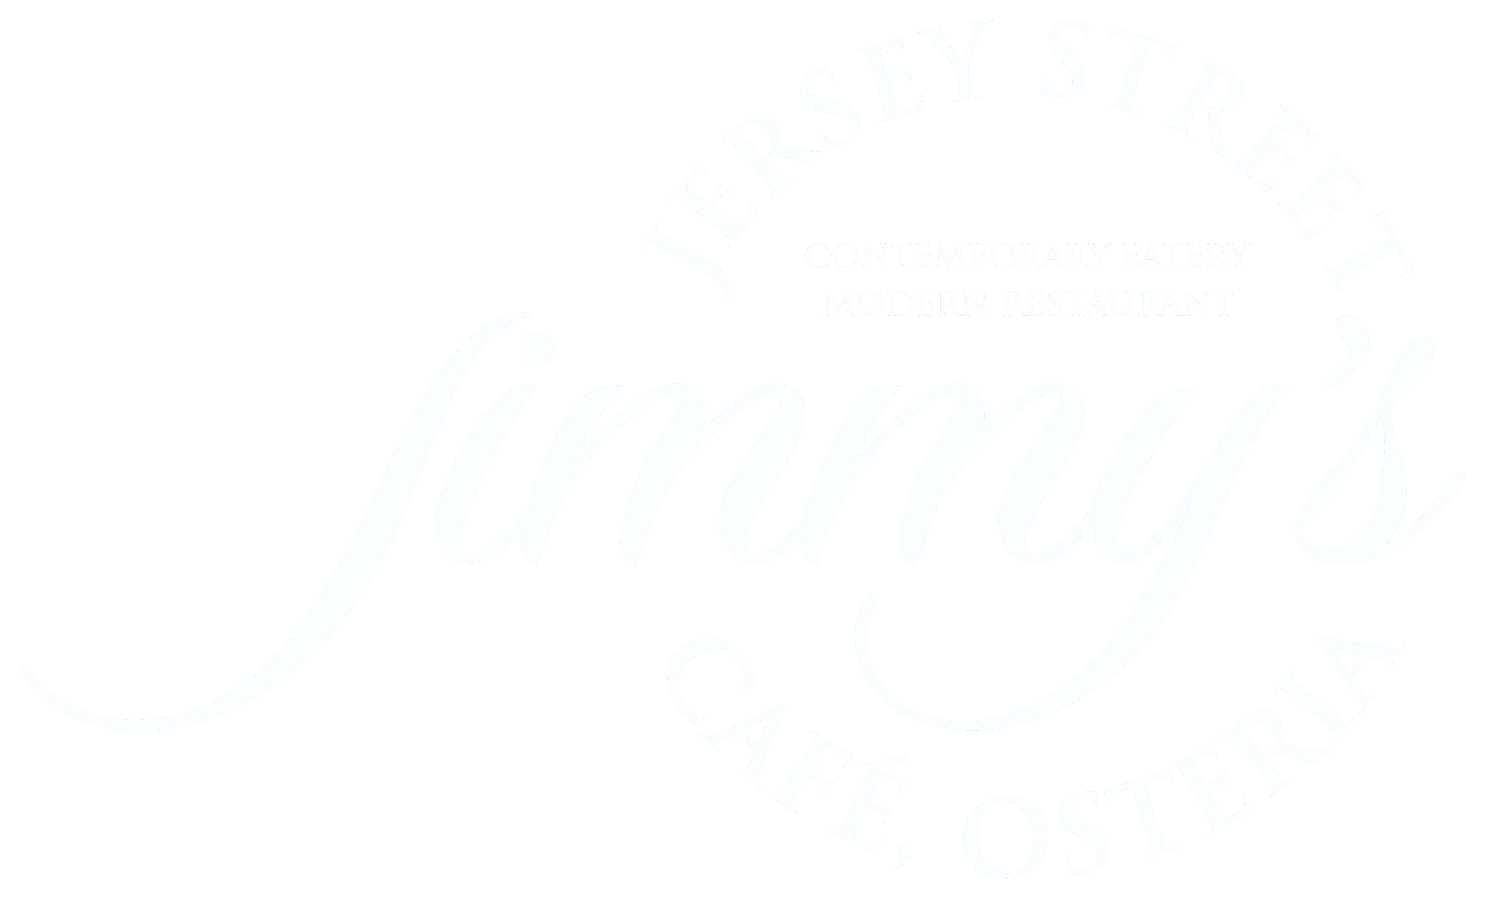 Jimmy Jersey Street Cafe Osteria logo top - Homepage